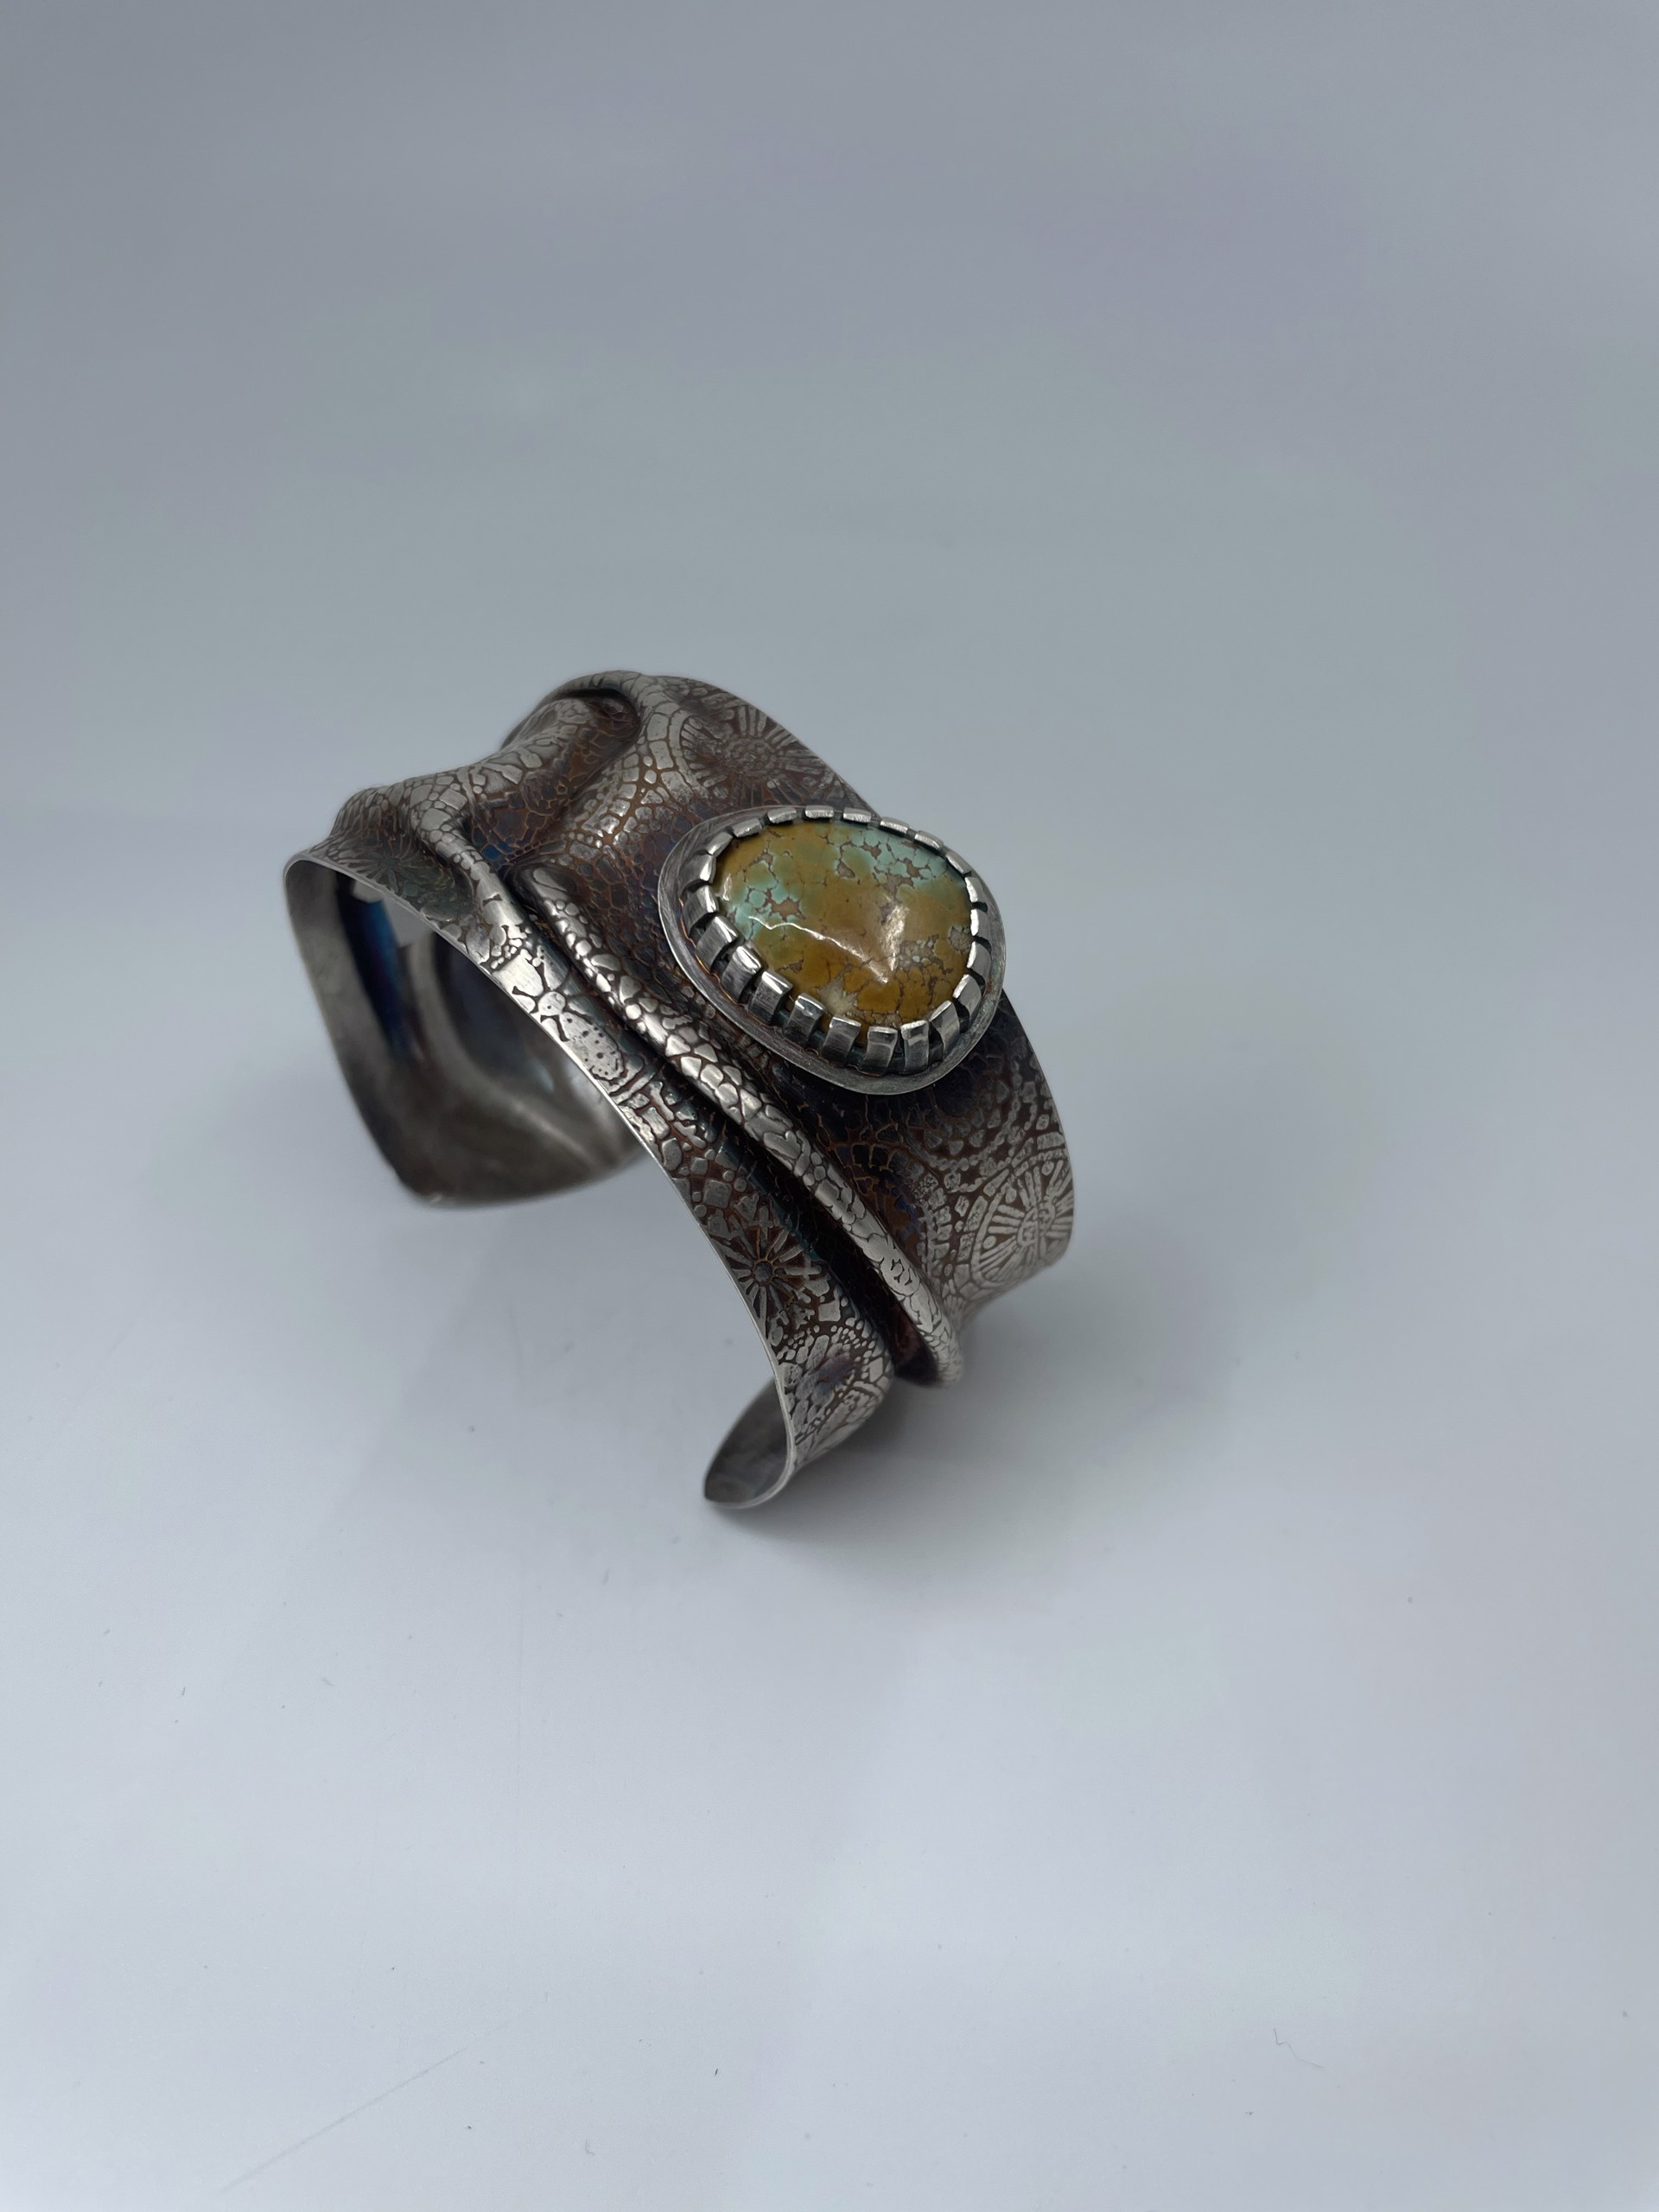 9496 Steampunk Turquoise Cuff by Lanni